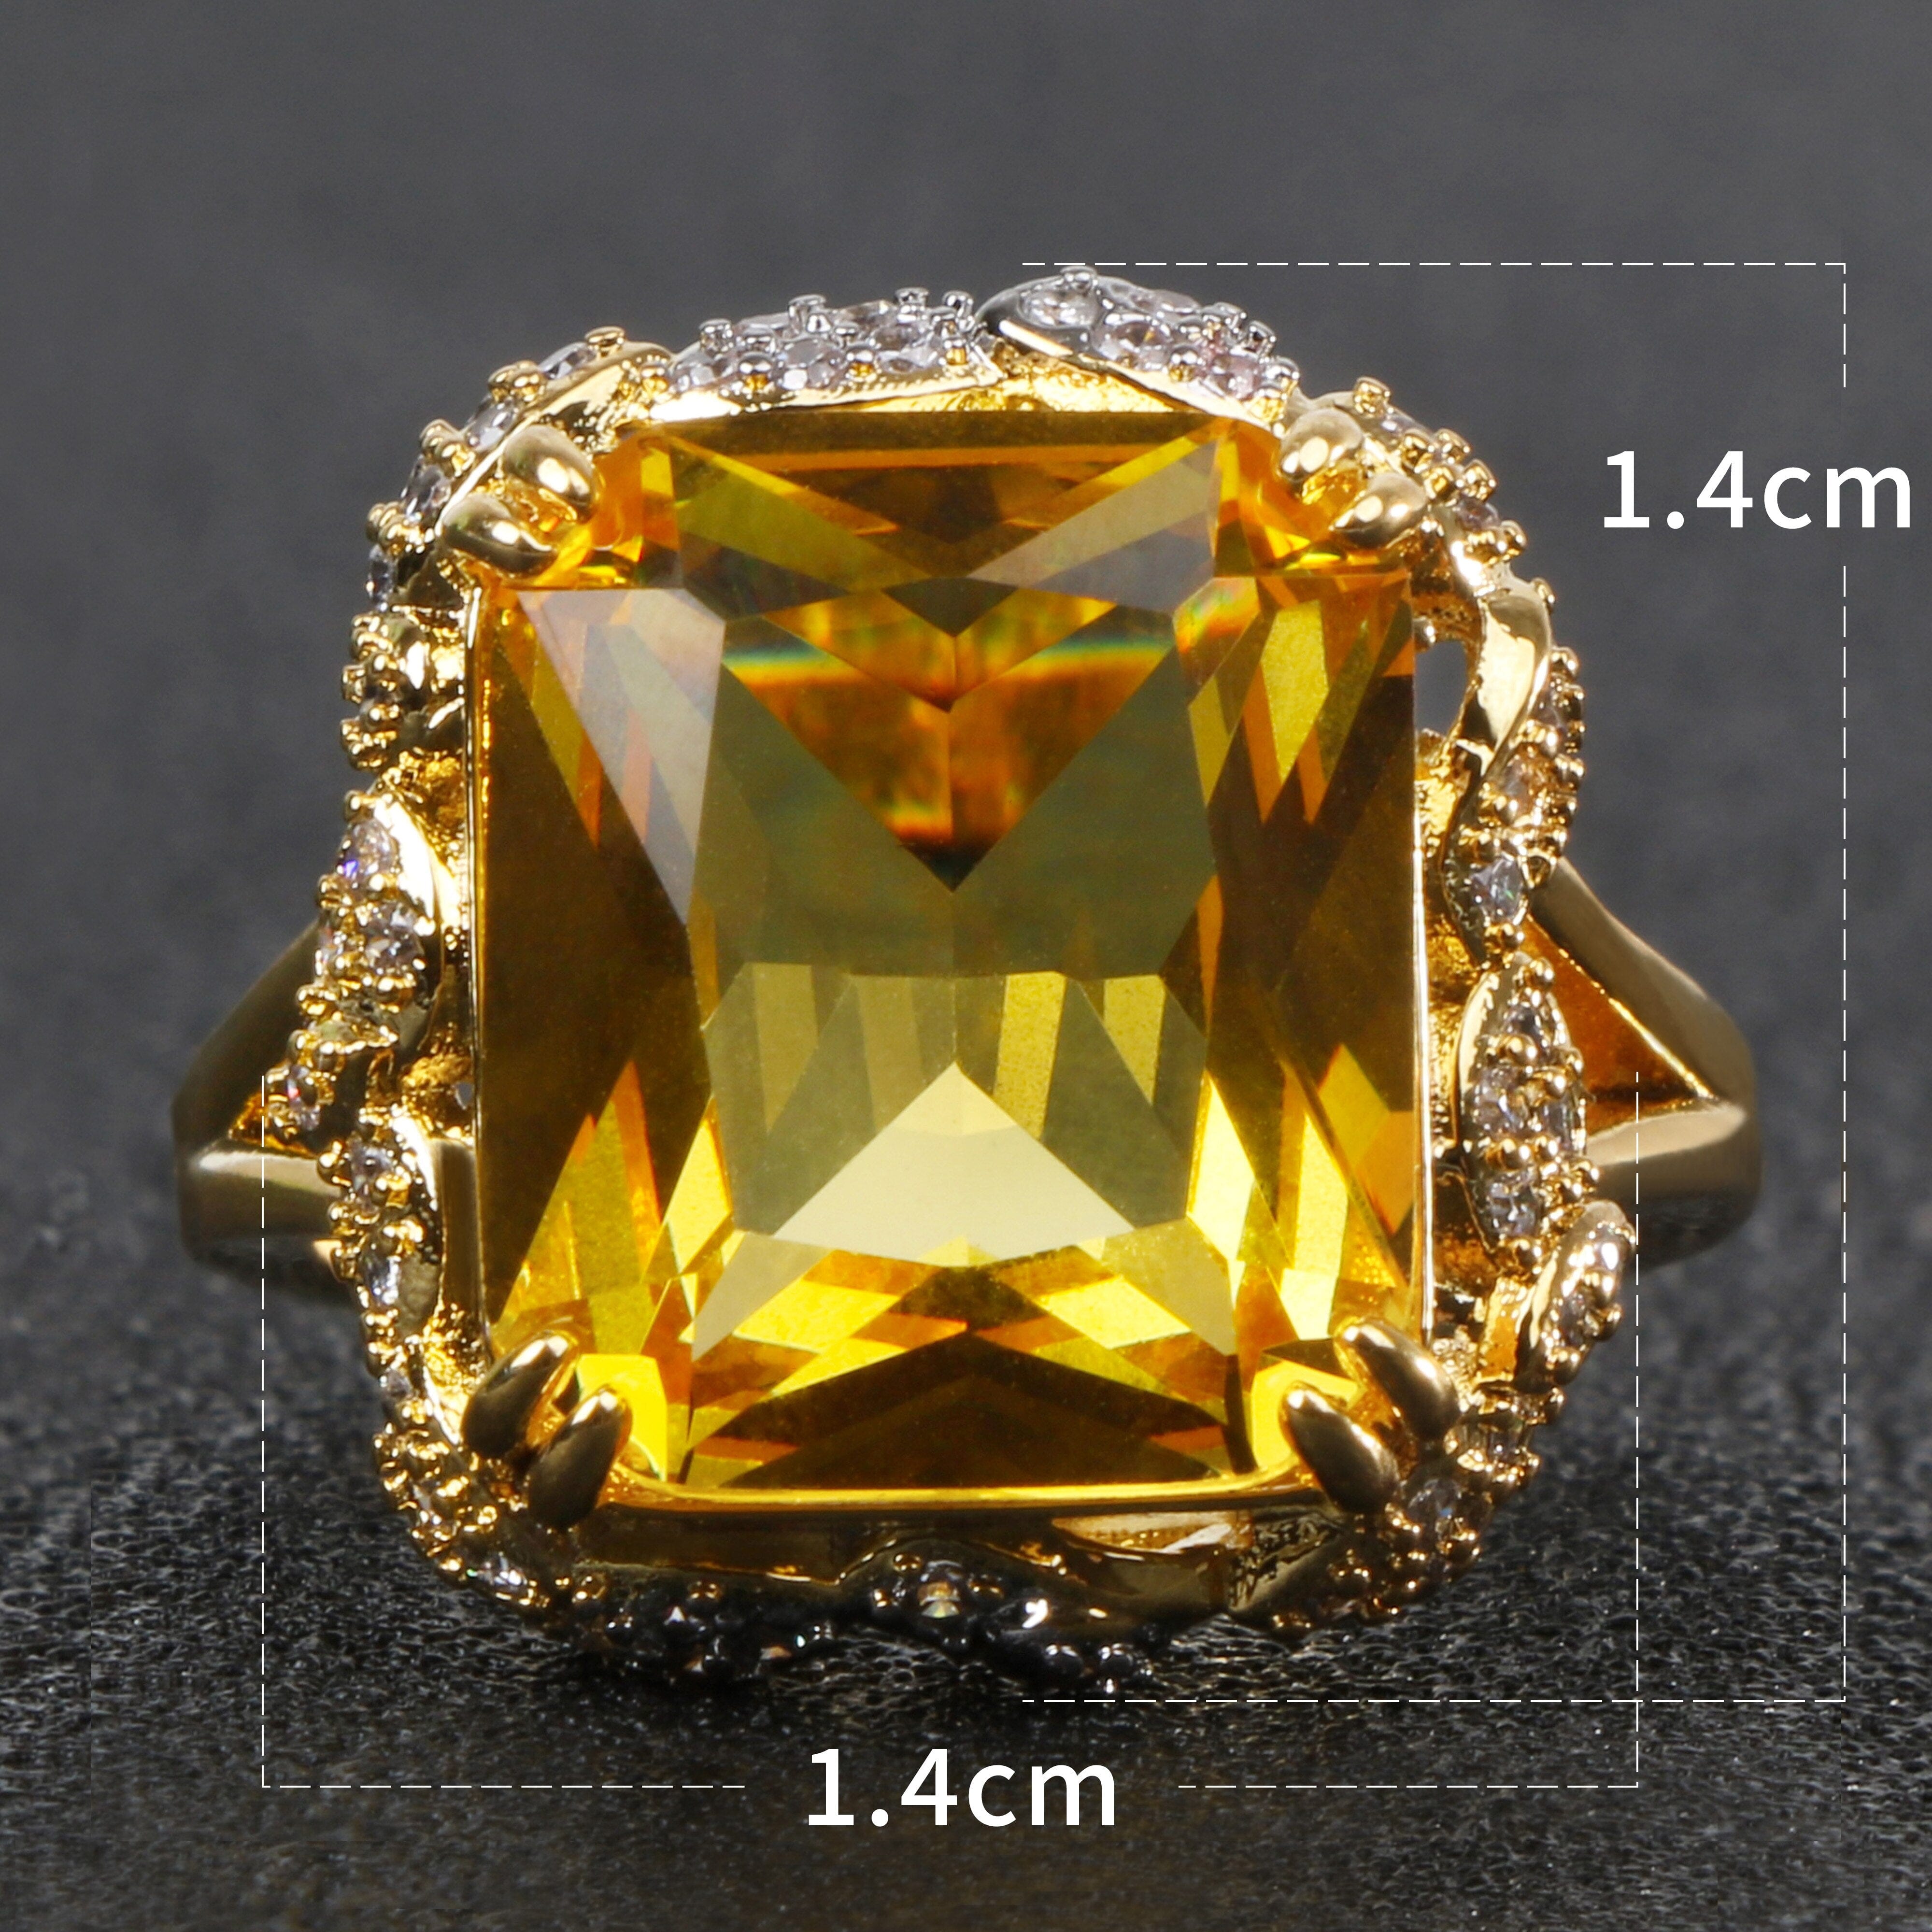 Luxury Charm Square Shaped Citrine Gemstone Ring - 925 Sterling SilverRing